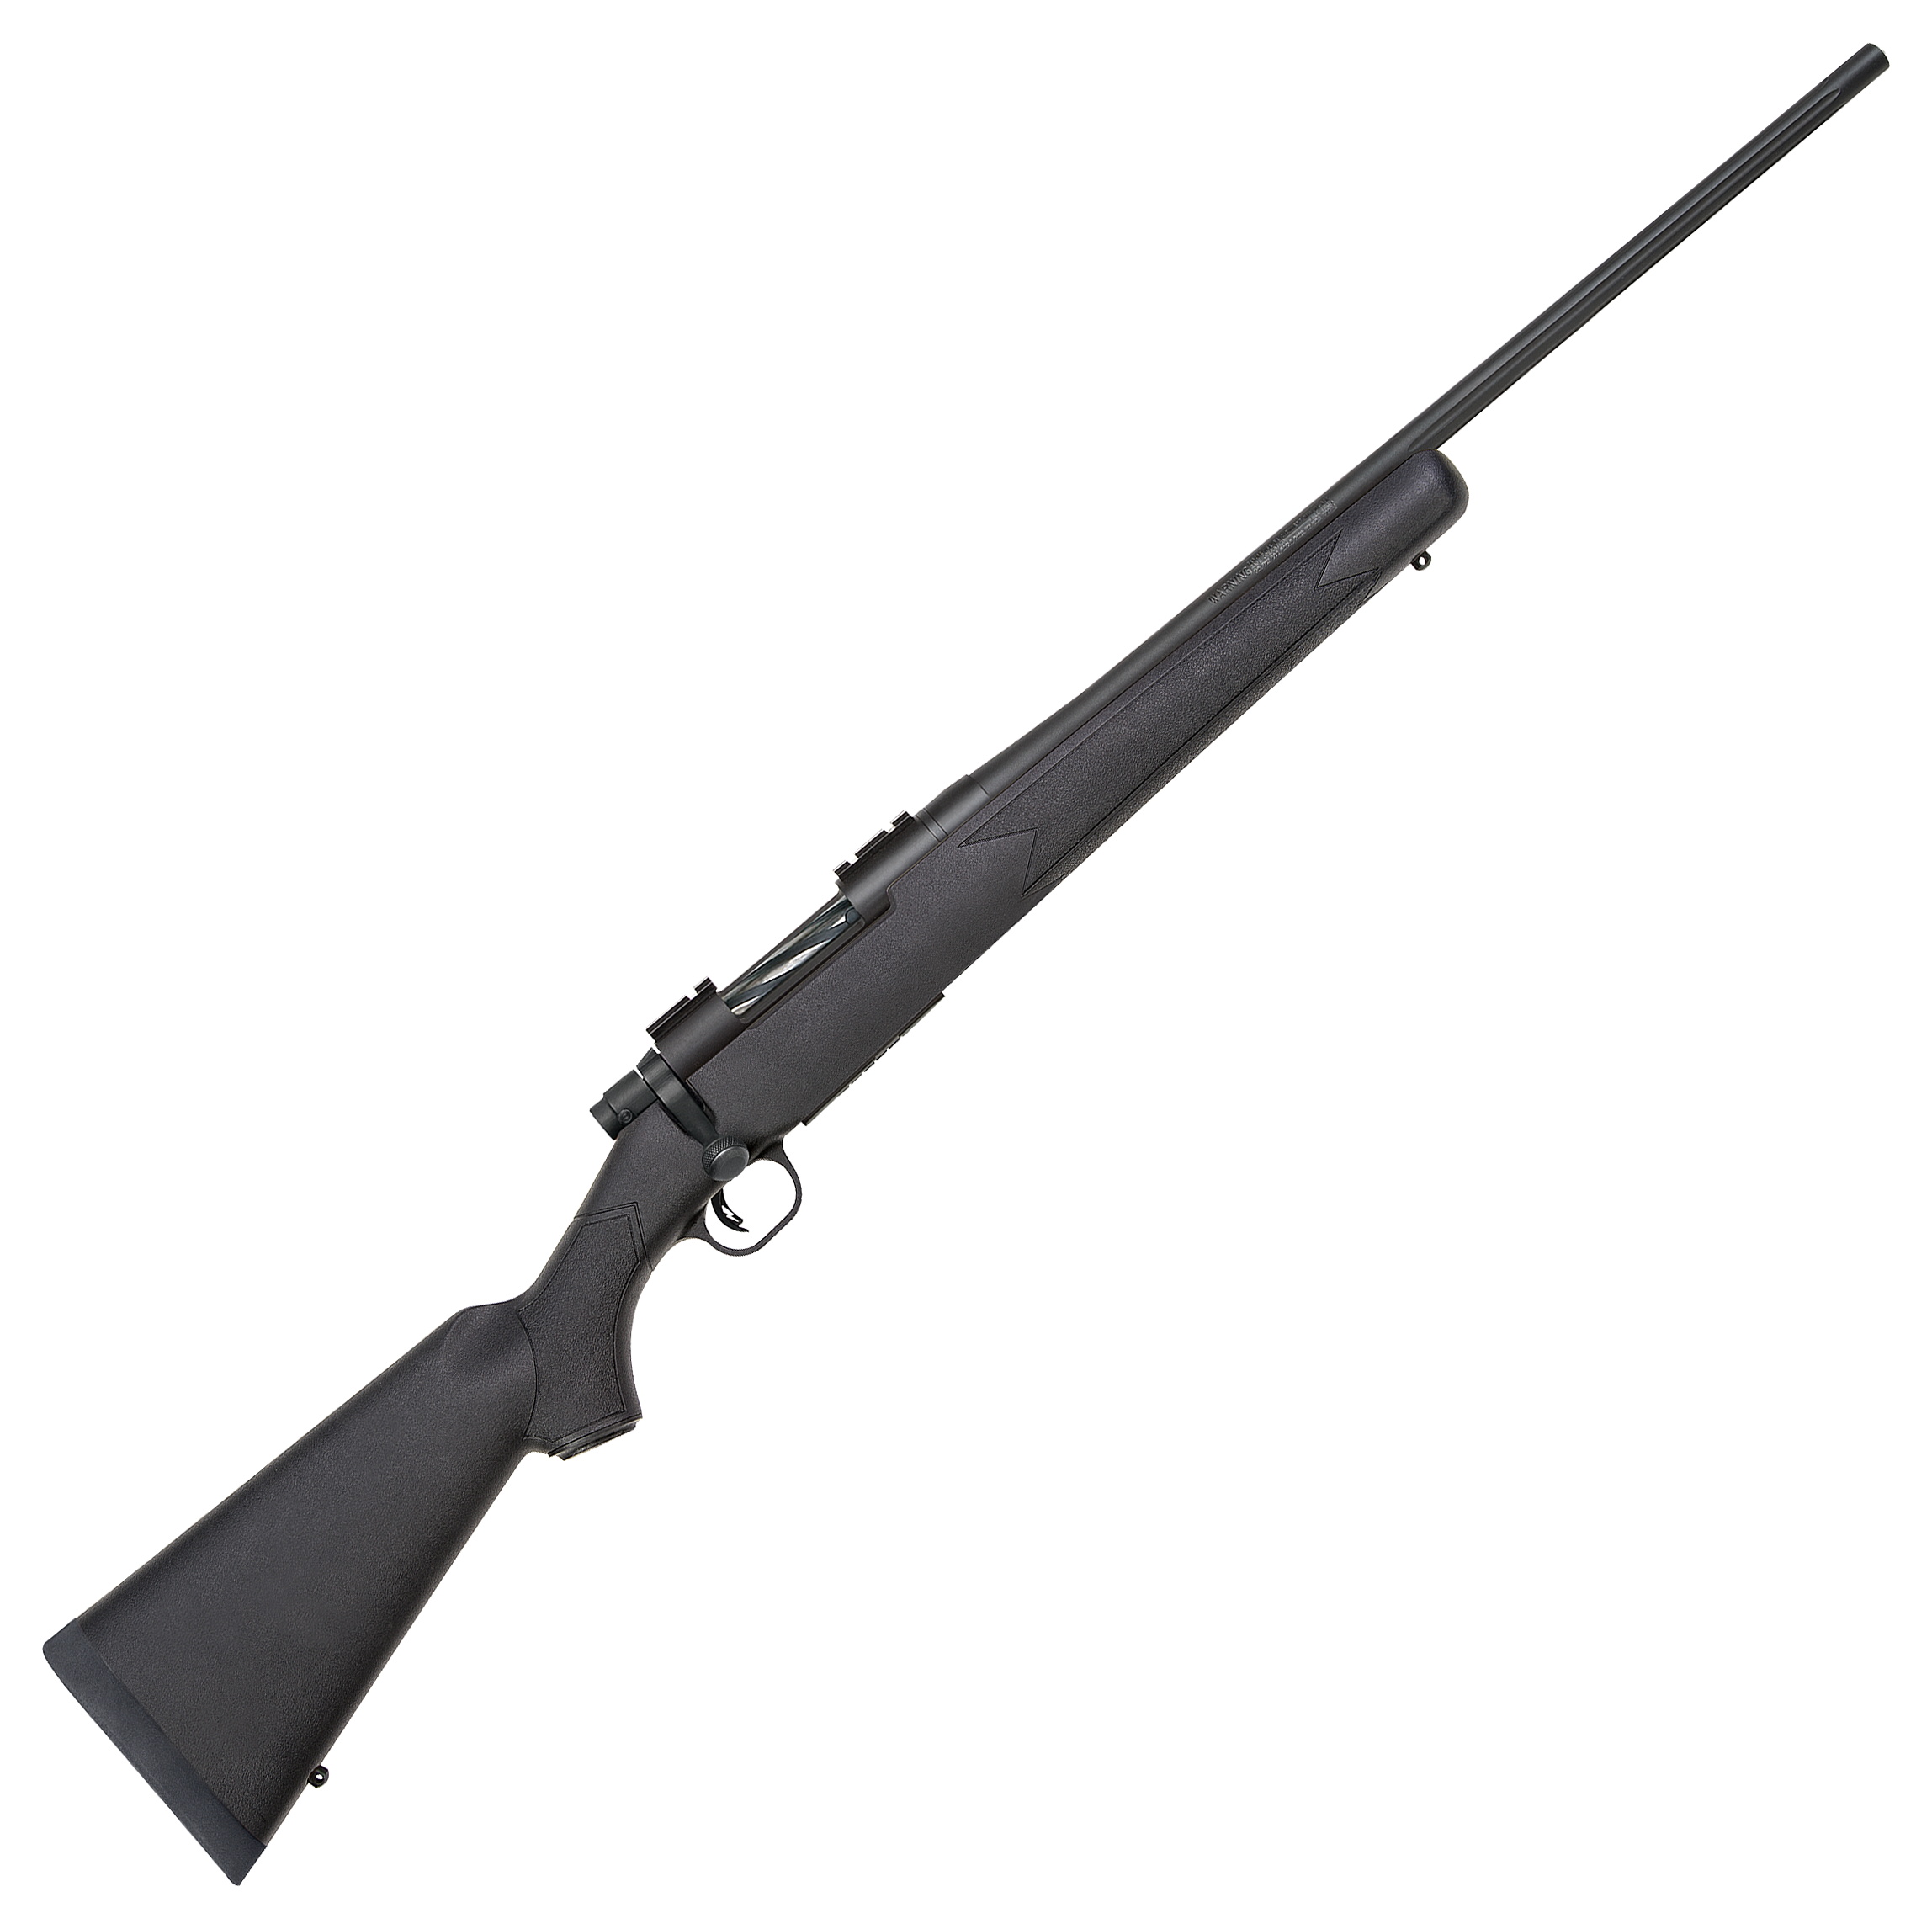 Mossberg Patriot Synthetic Bolt-Action Rifle